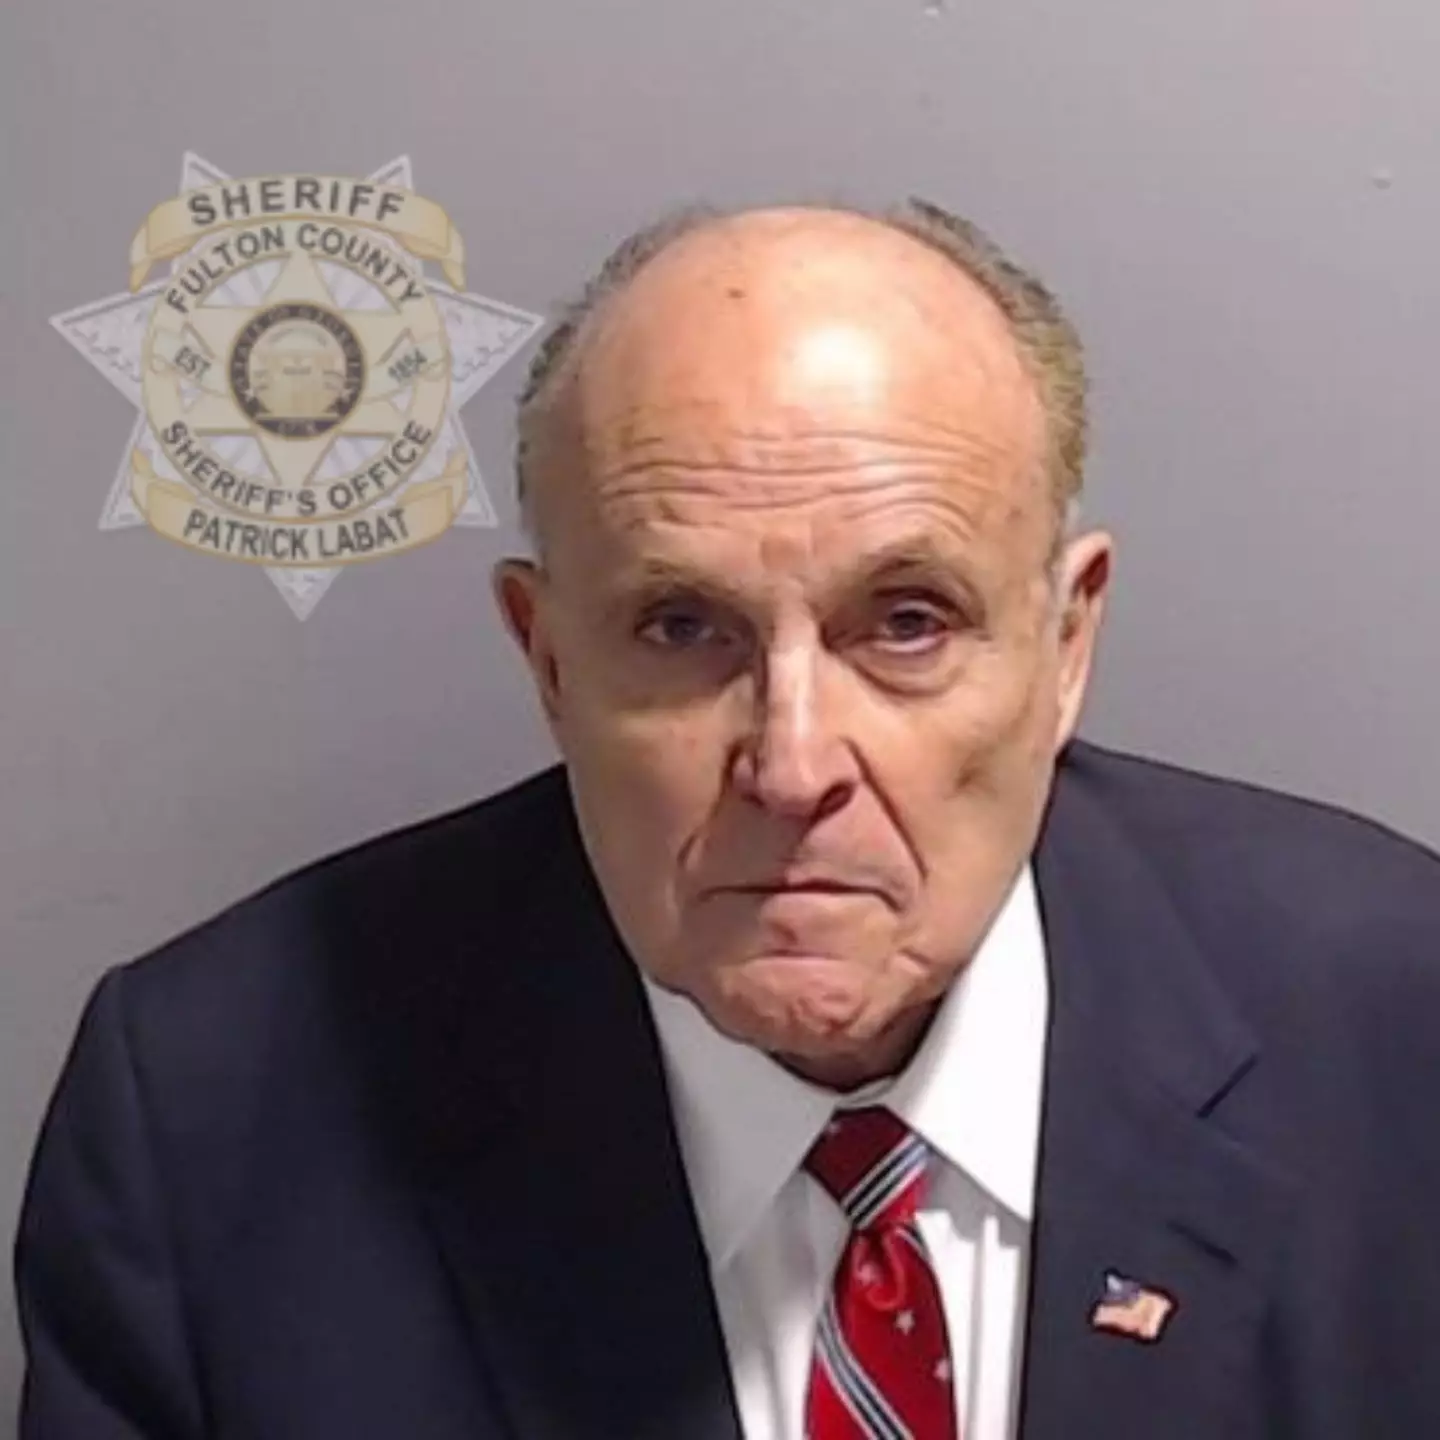 One of the other 19 people who are part of the Georgia indictment is Rudy Giuliani, Trump's former lawyer.